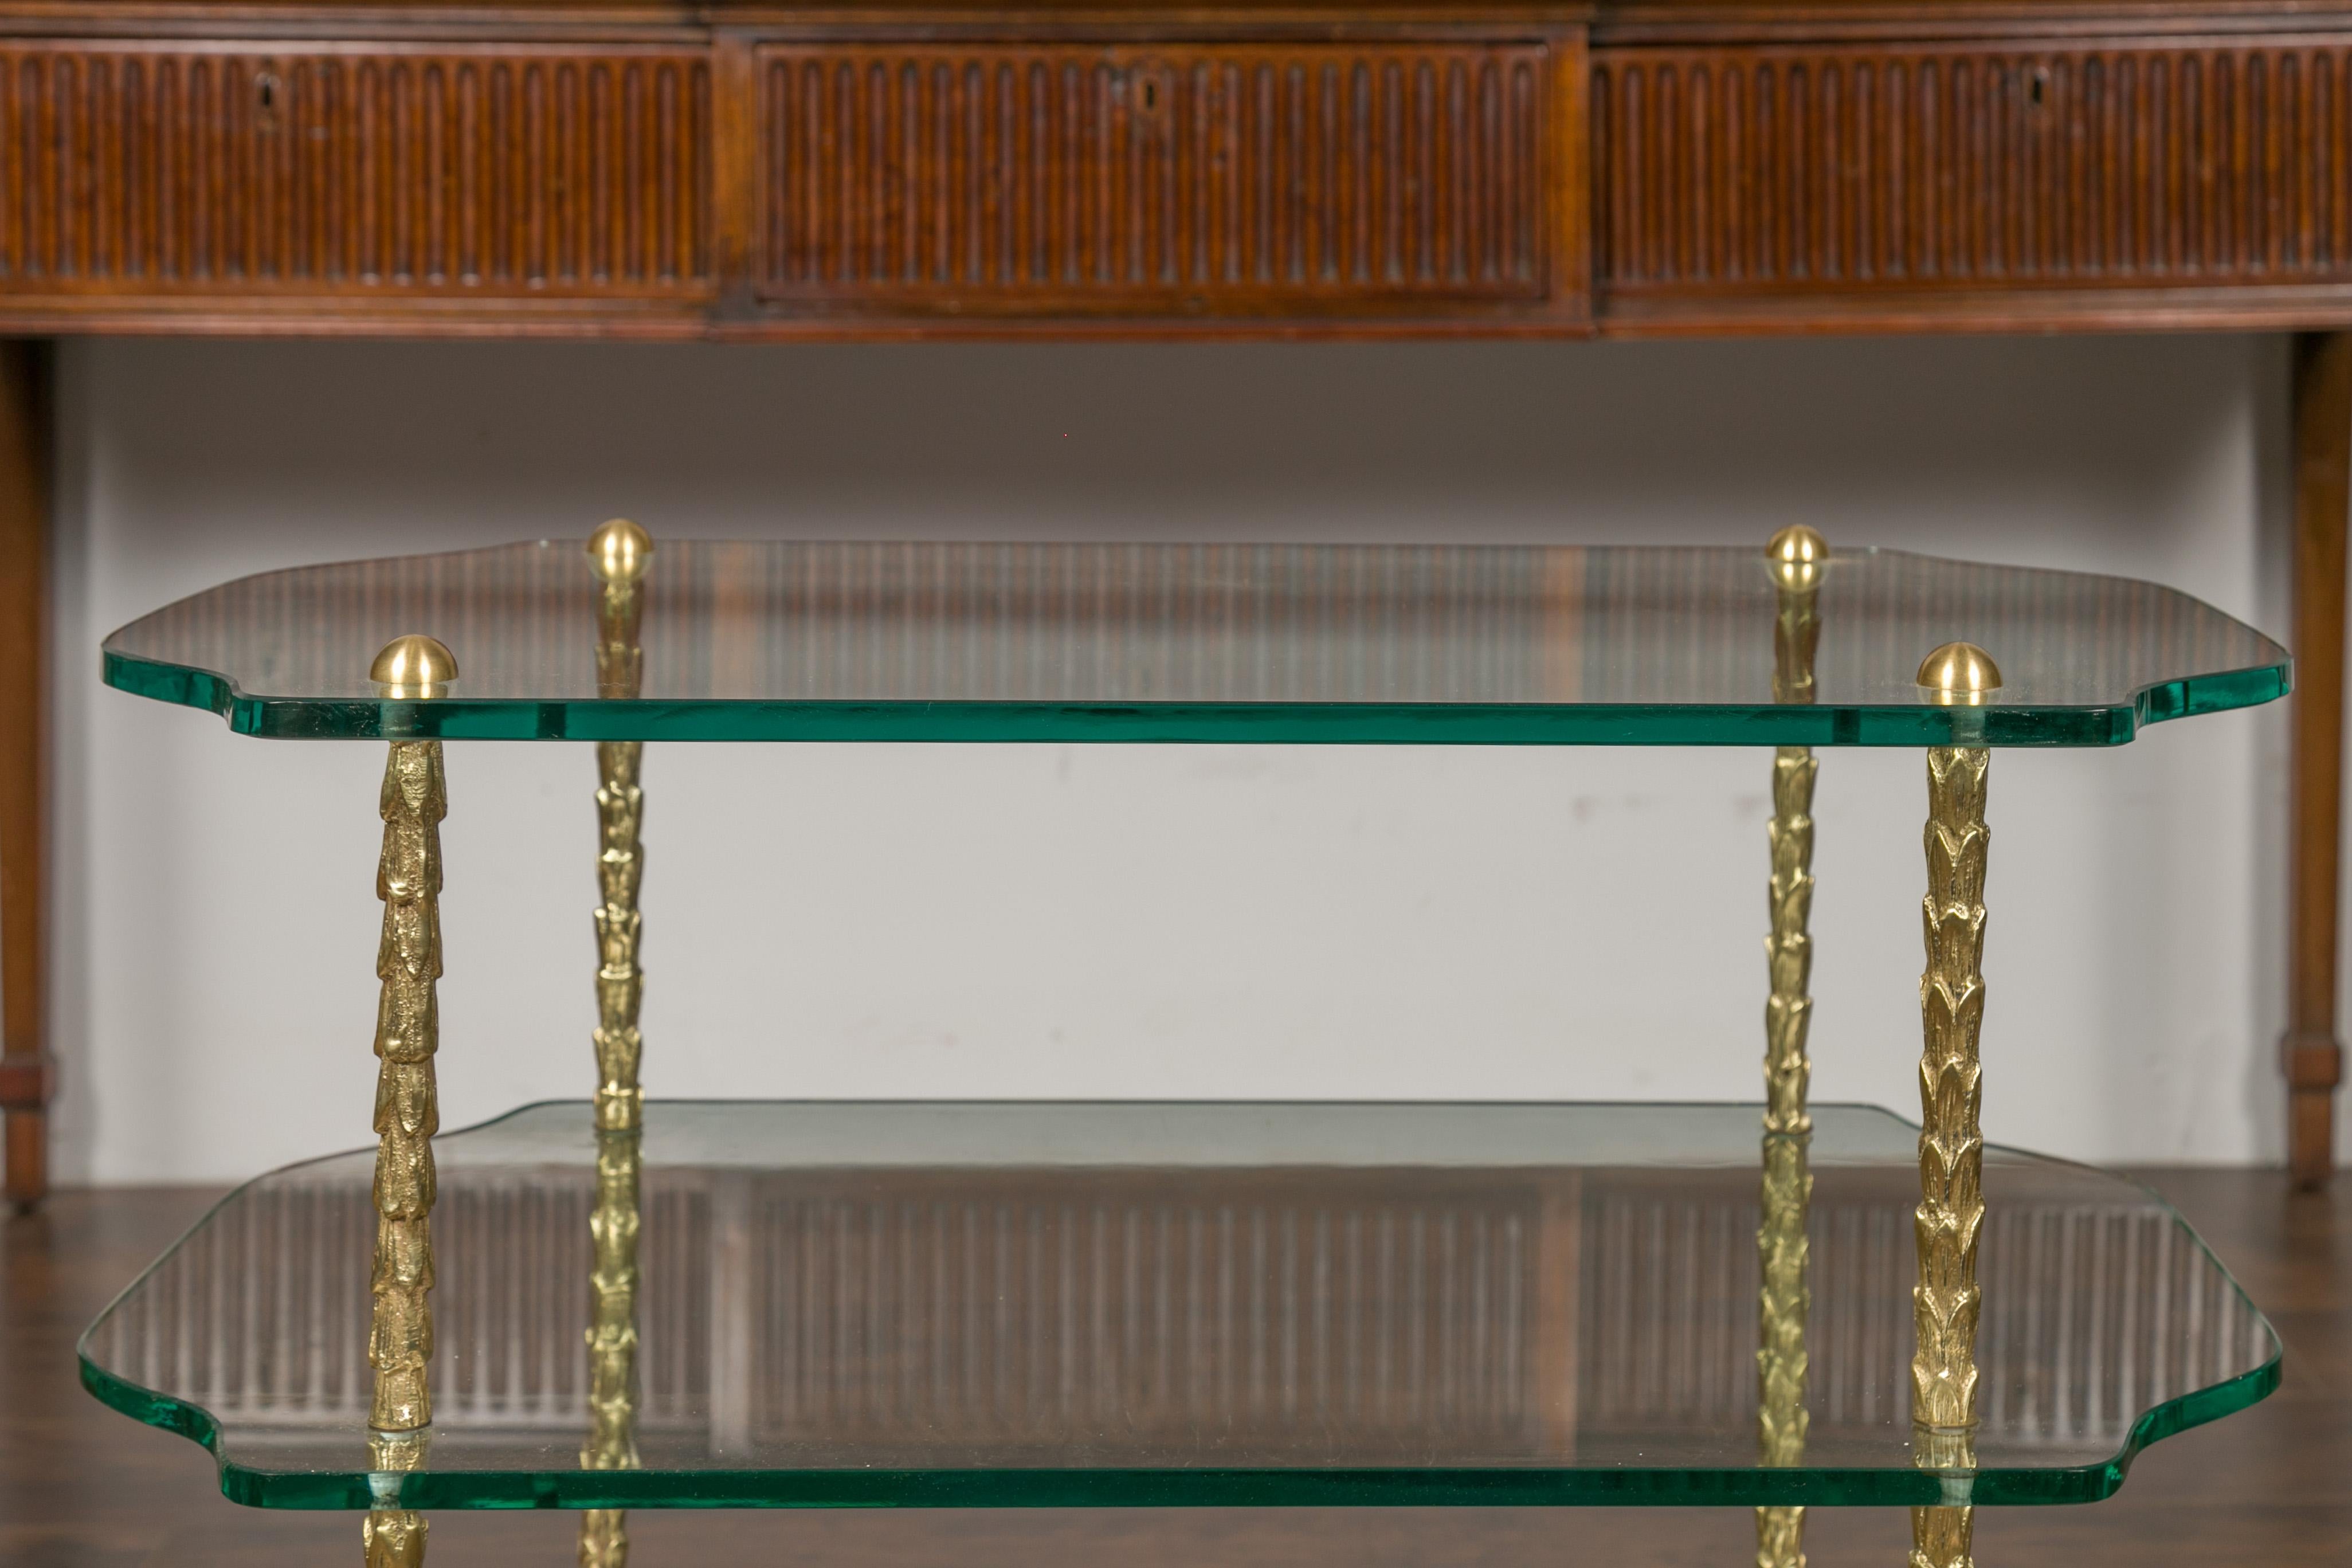 European Midcentury Brass Three-Tiered Table with Glass Shelves and Foliage Motifs For Sale